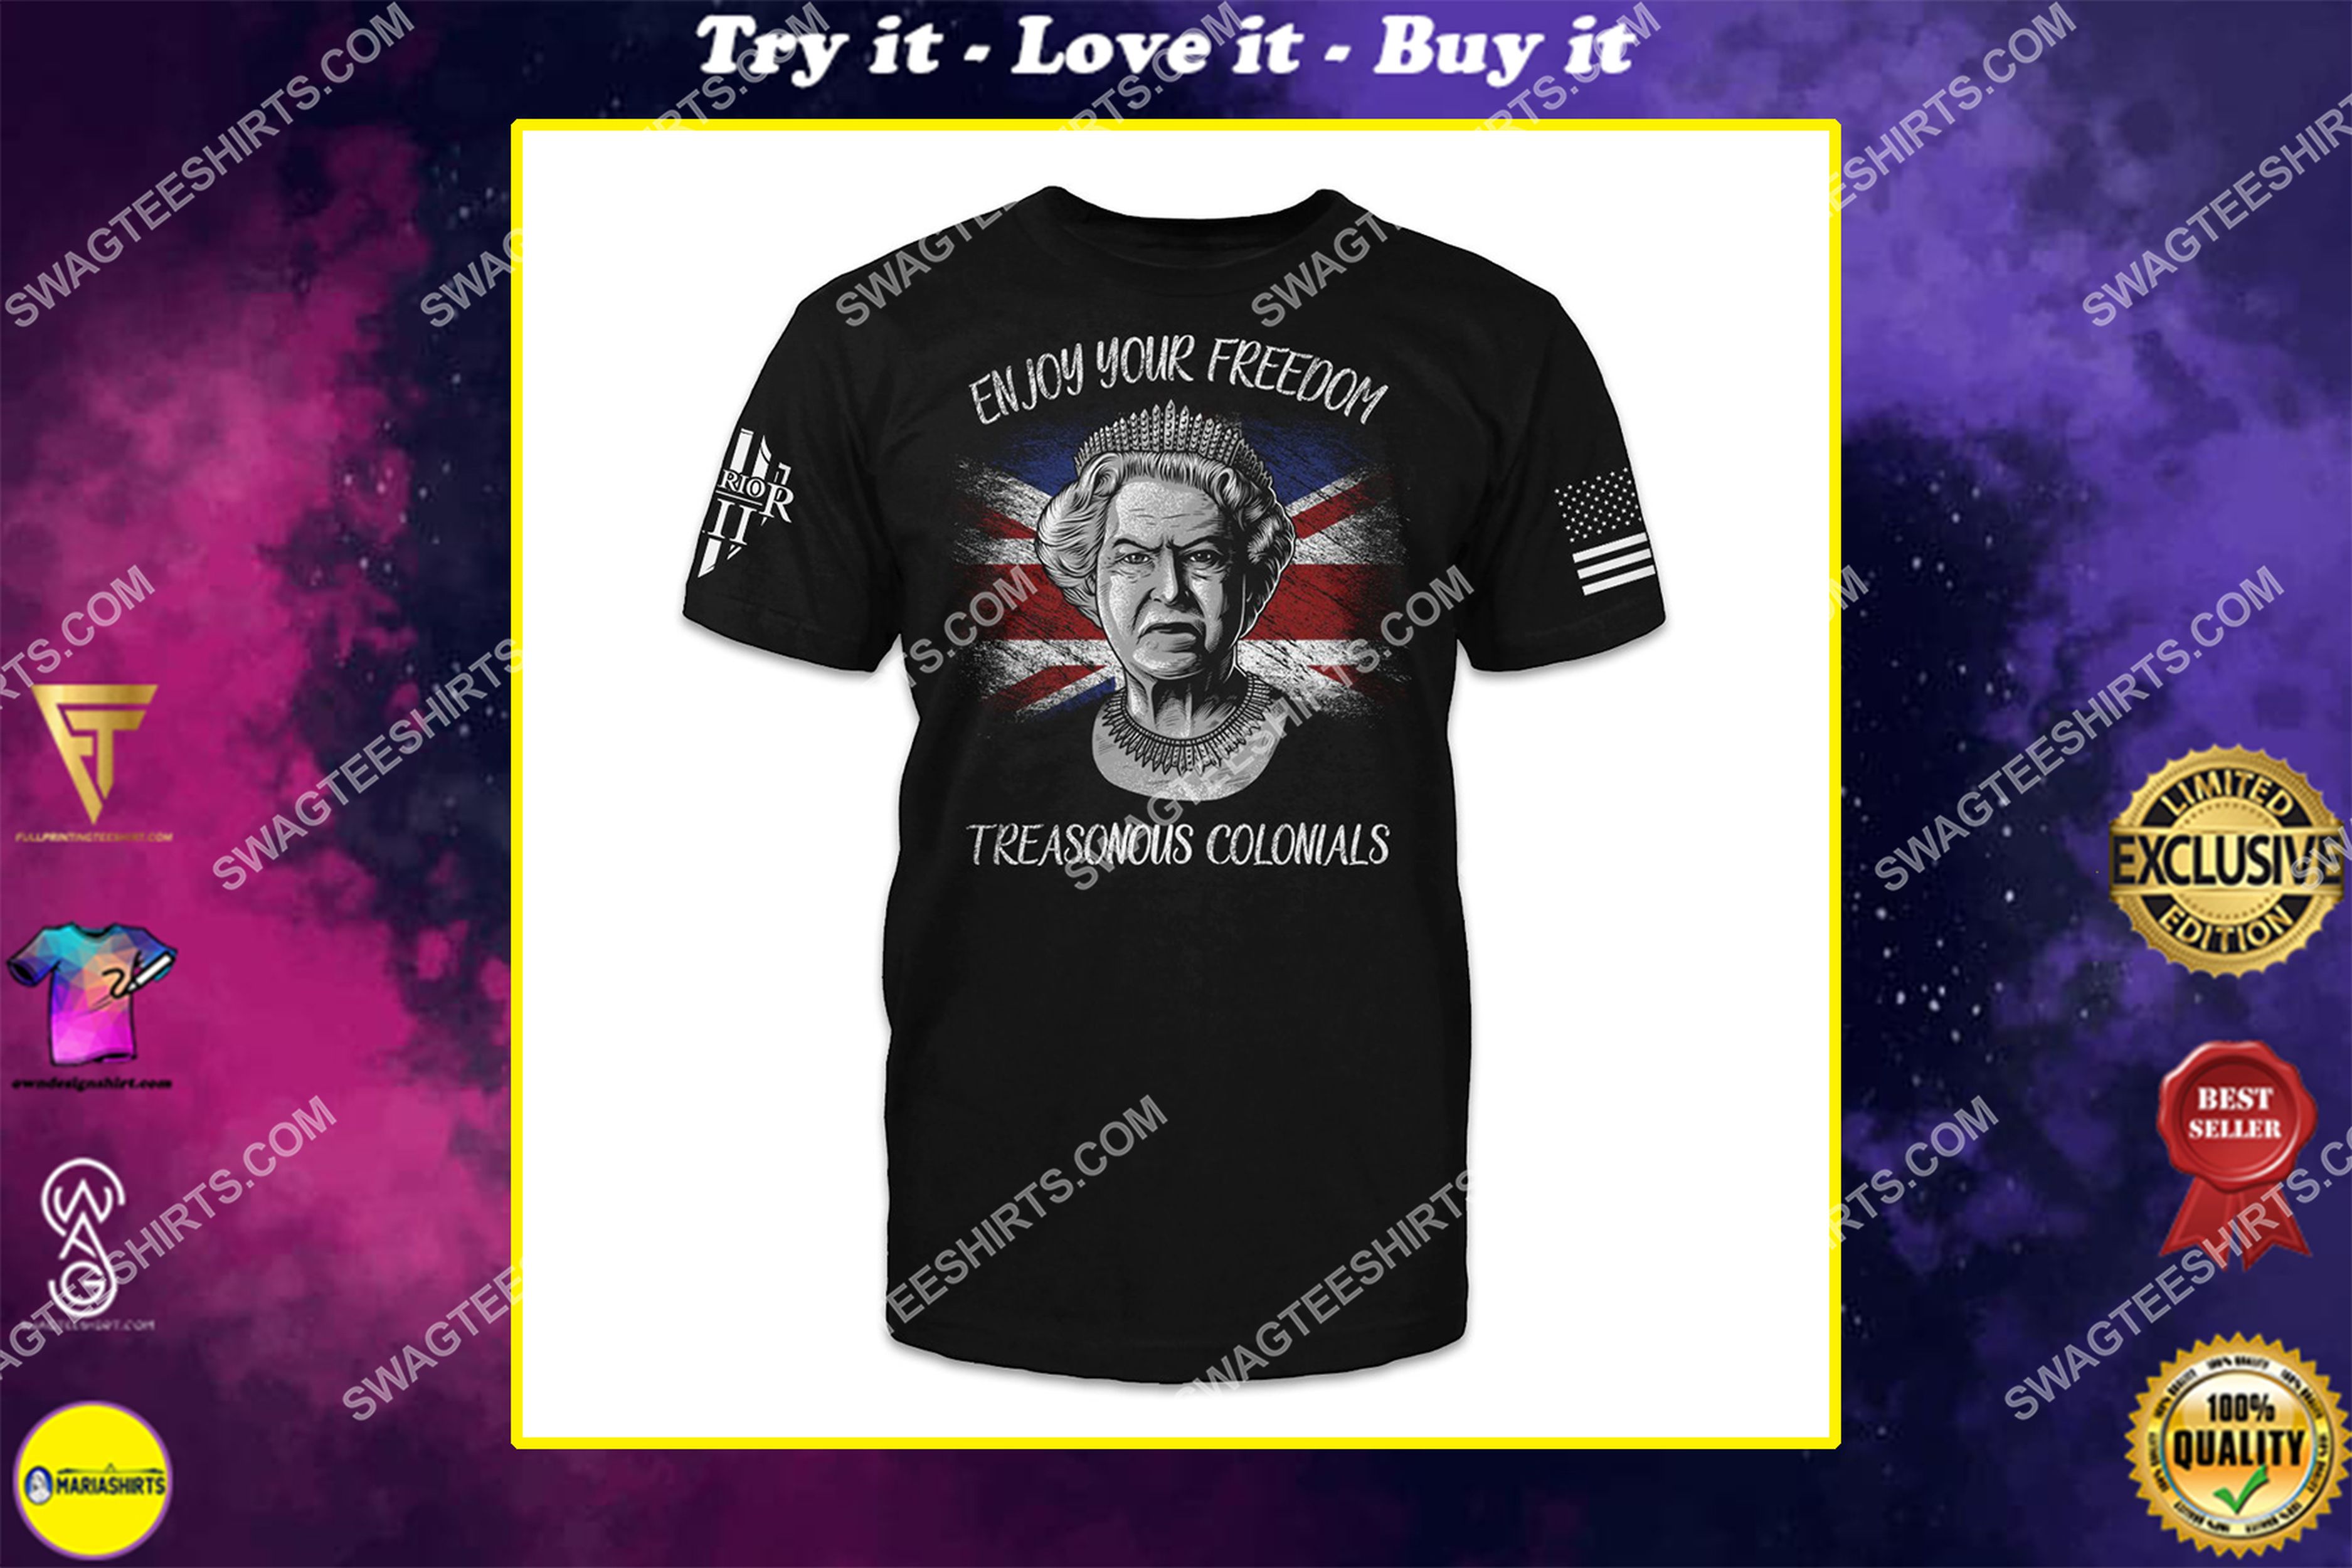 [special edition] enjoy your freedom treasonous colonials queen of england shirt – maria